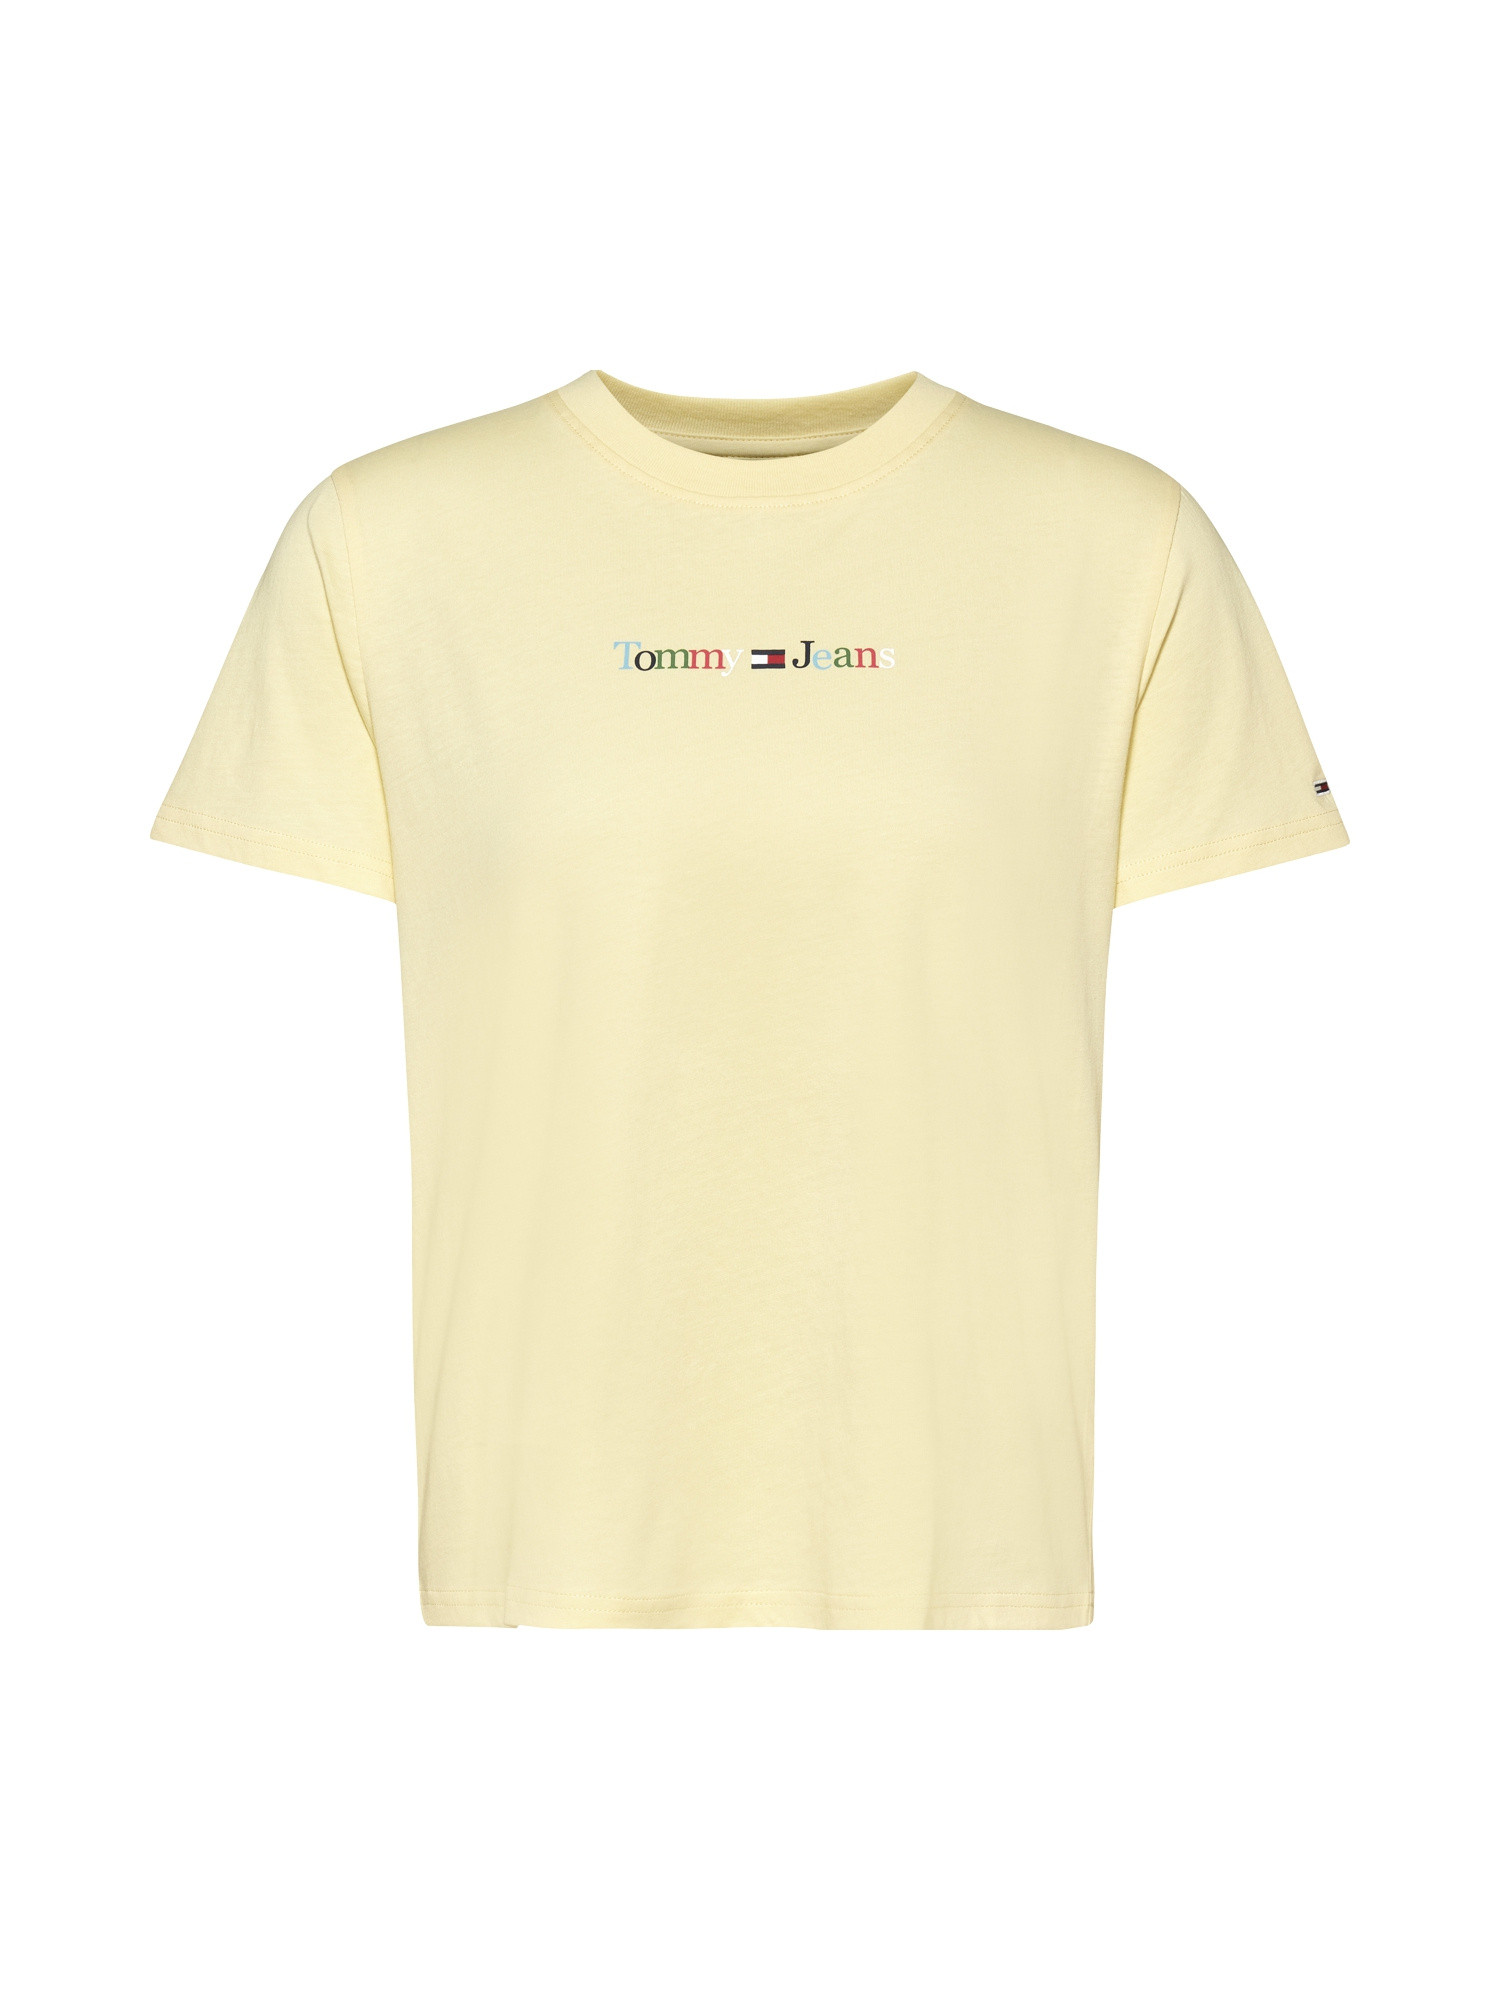 Tommy Jeans - Cotton T-shirt with logo, Light Yellow, large image number 0